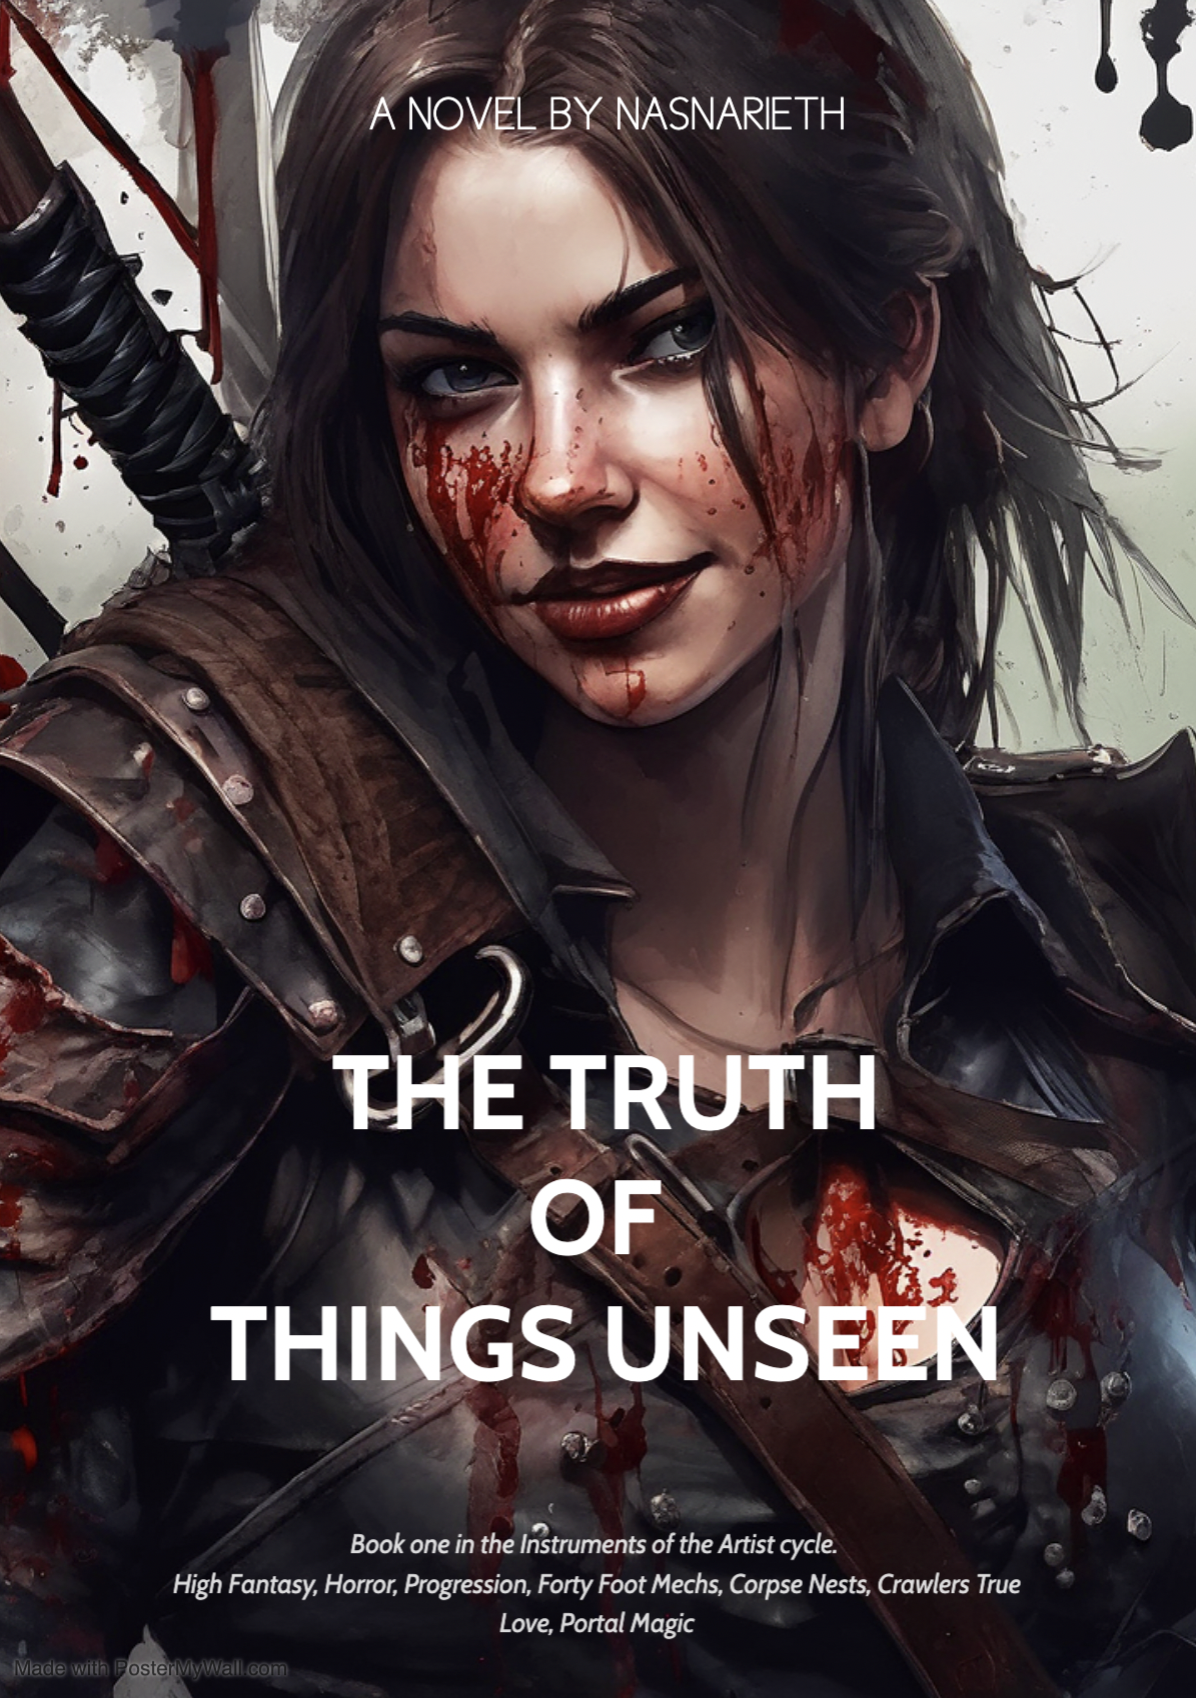 The Truth of Things Unseen - cover art